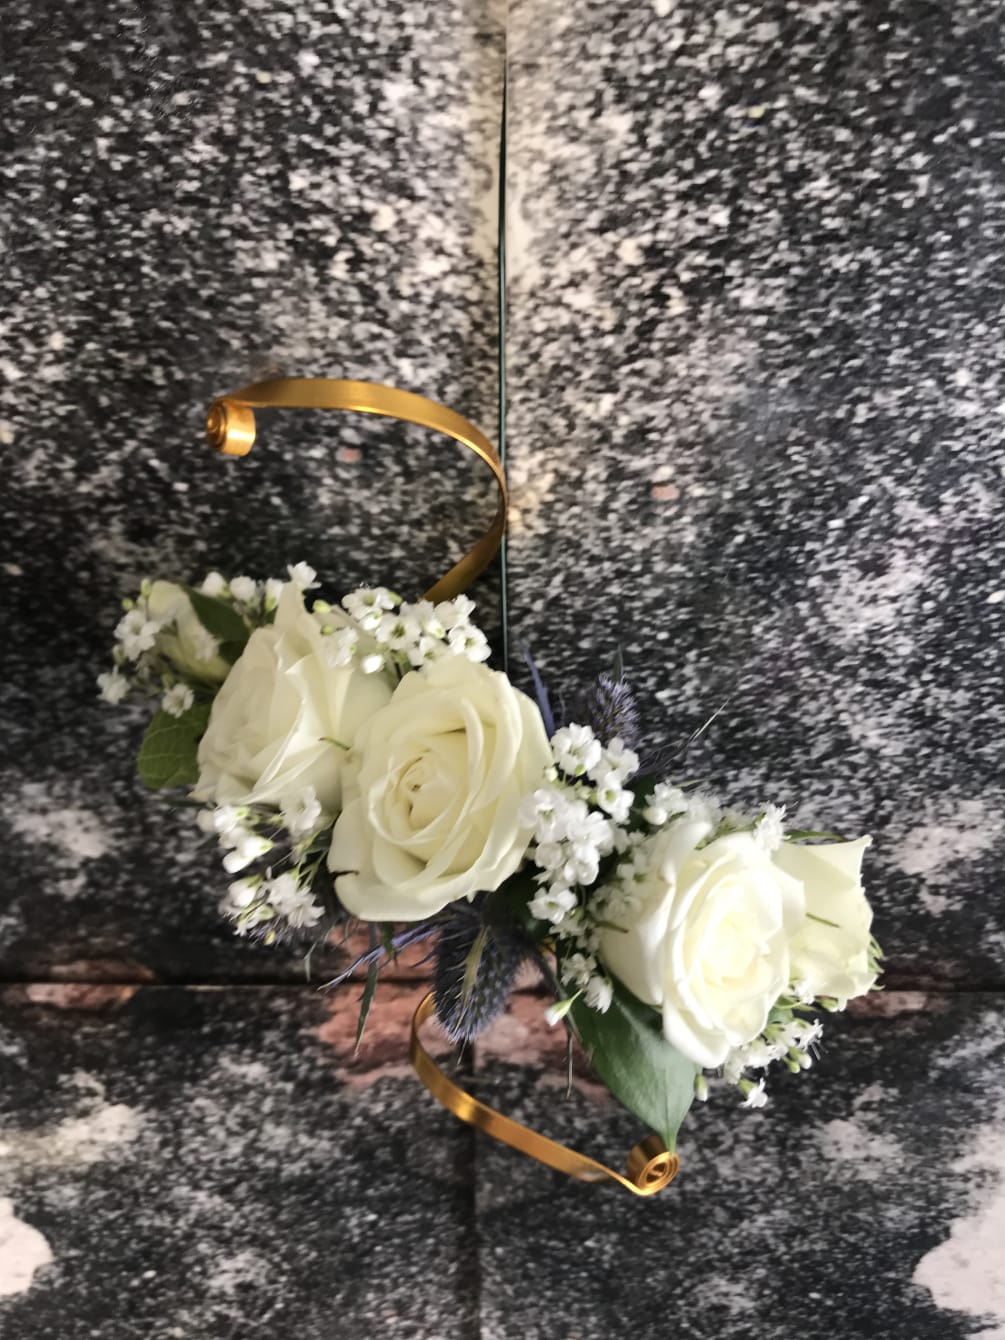 This corsage is designed with White Spray Roses, Varigated Grass and Seeded